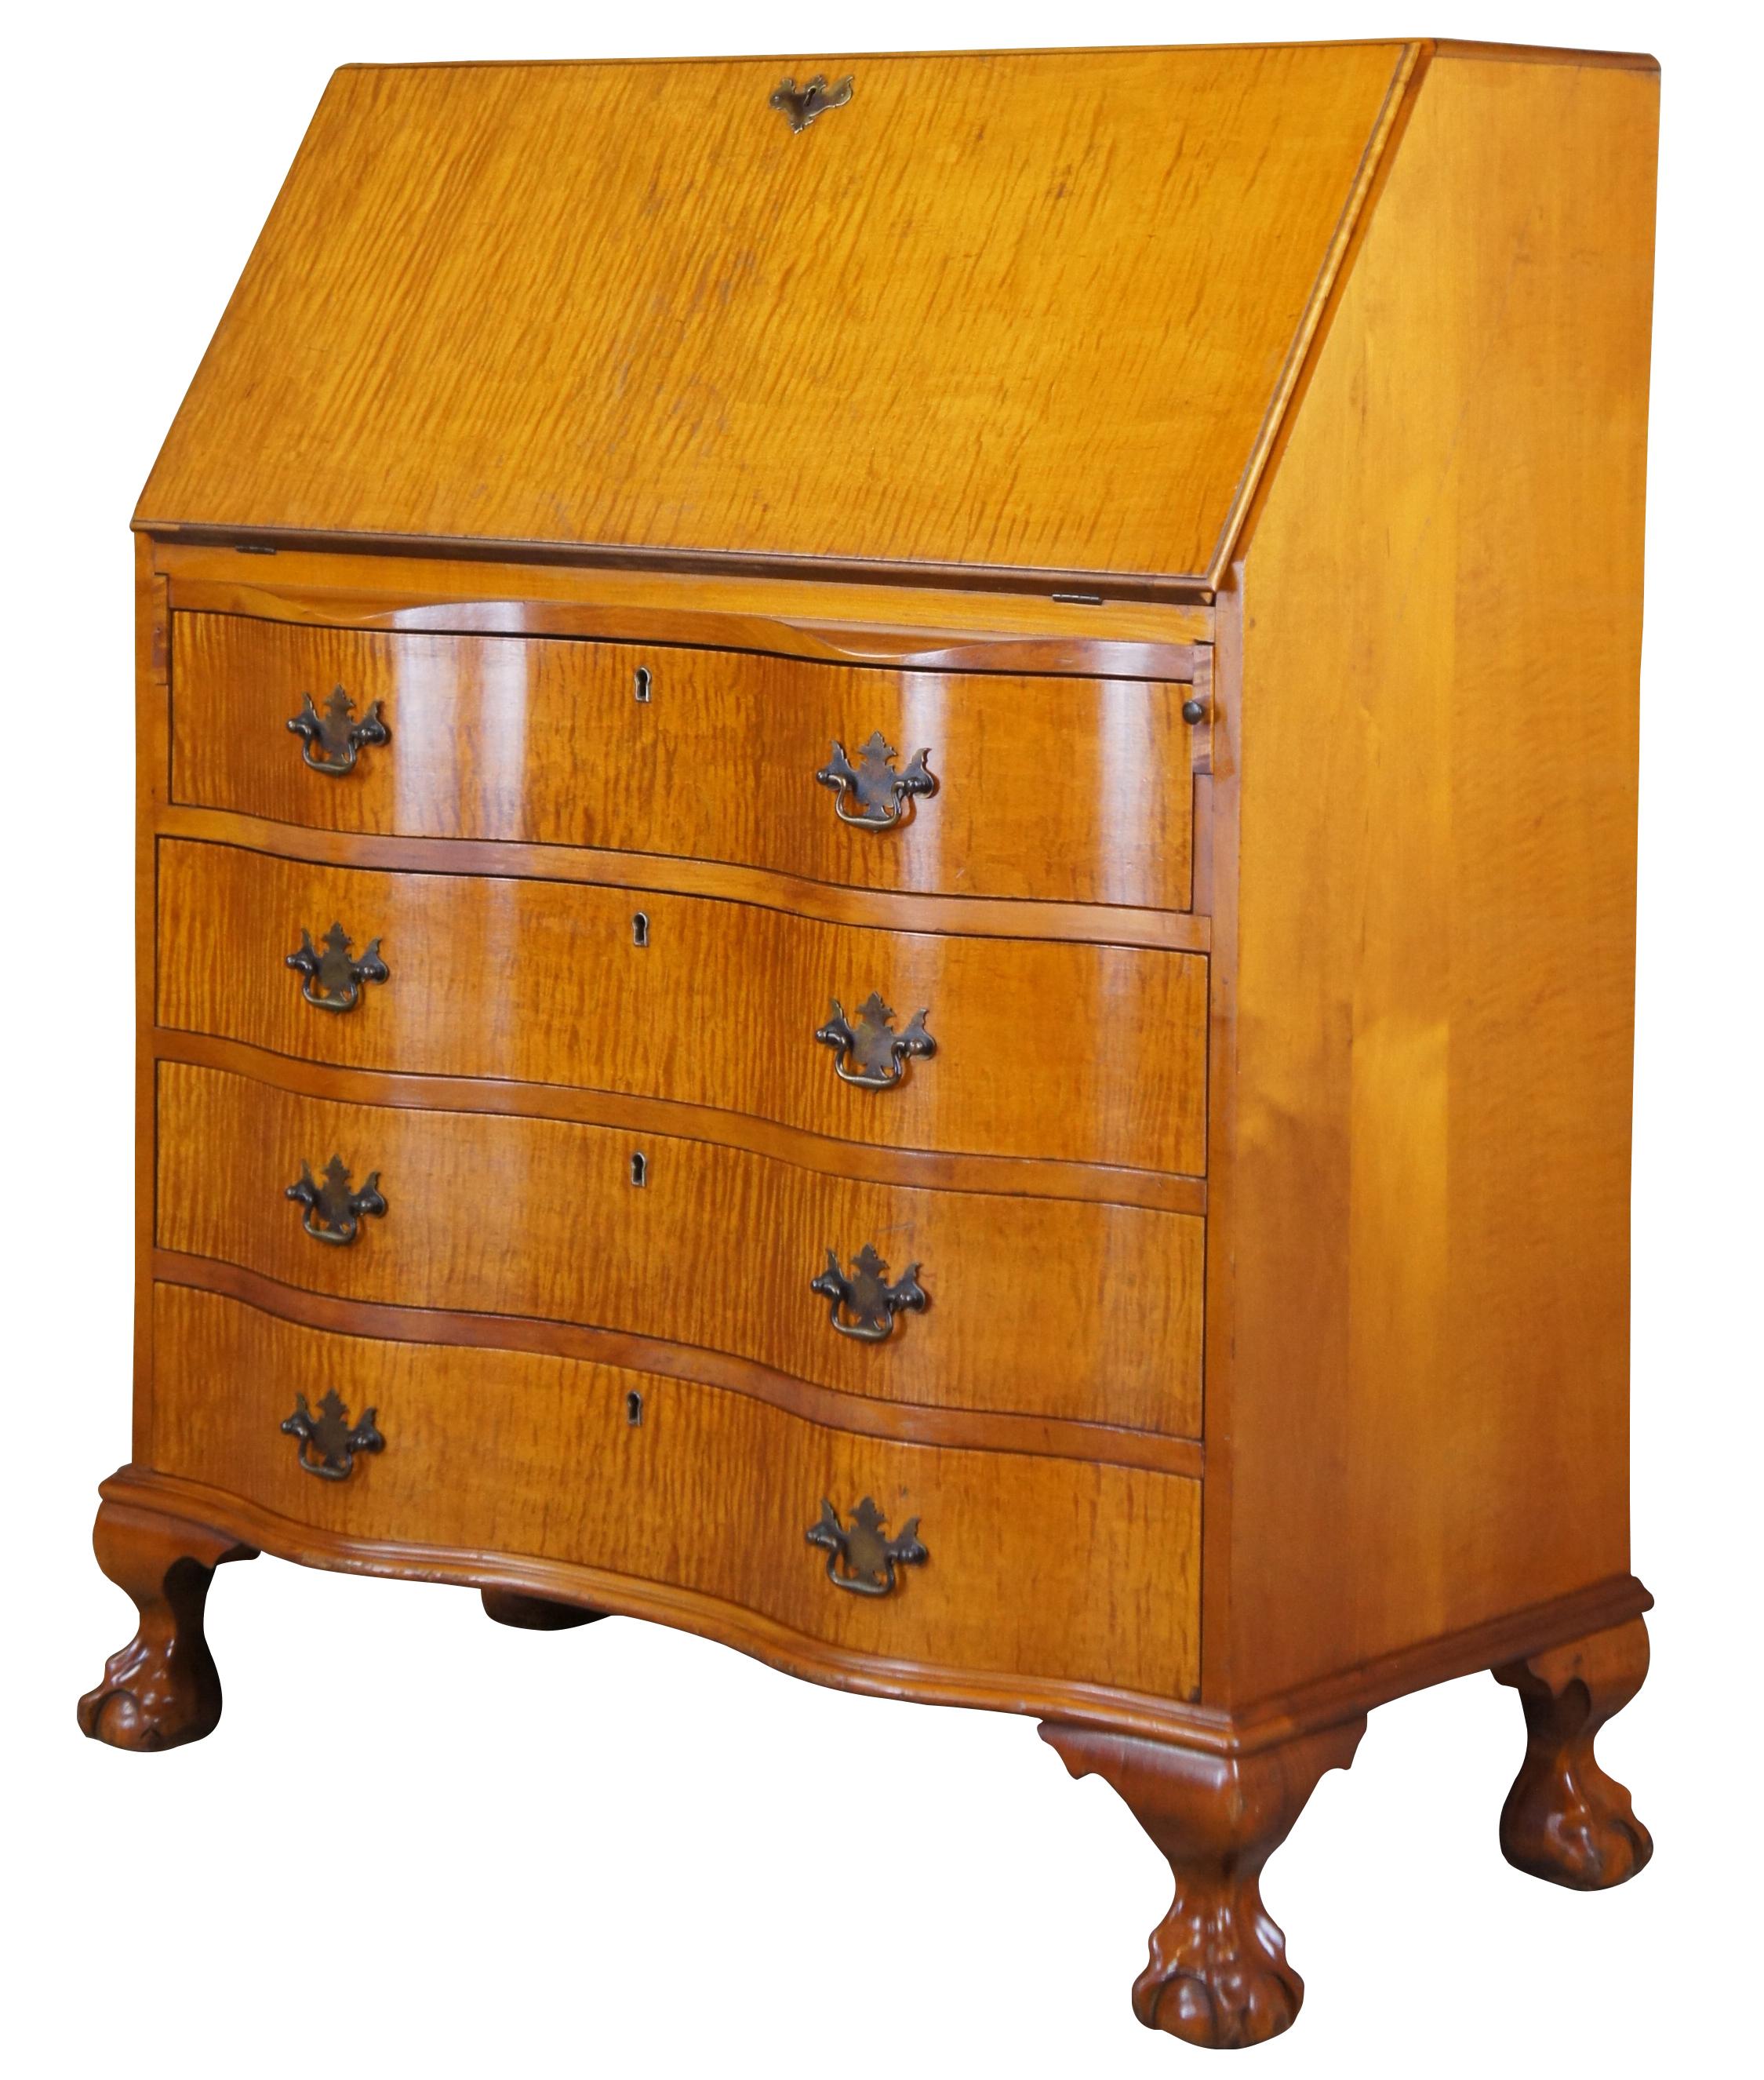 Antique secretary or writing desk. Made from tiger maple featuring a flip top that opens to multiple drawers, file storage and hidden compartments. The dresser is constructed with an oxbow front with four drawers and federal style hardware over ball